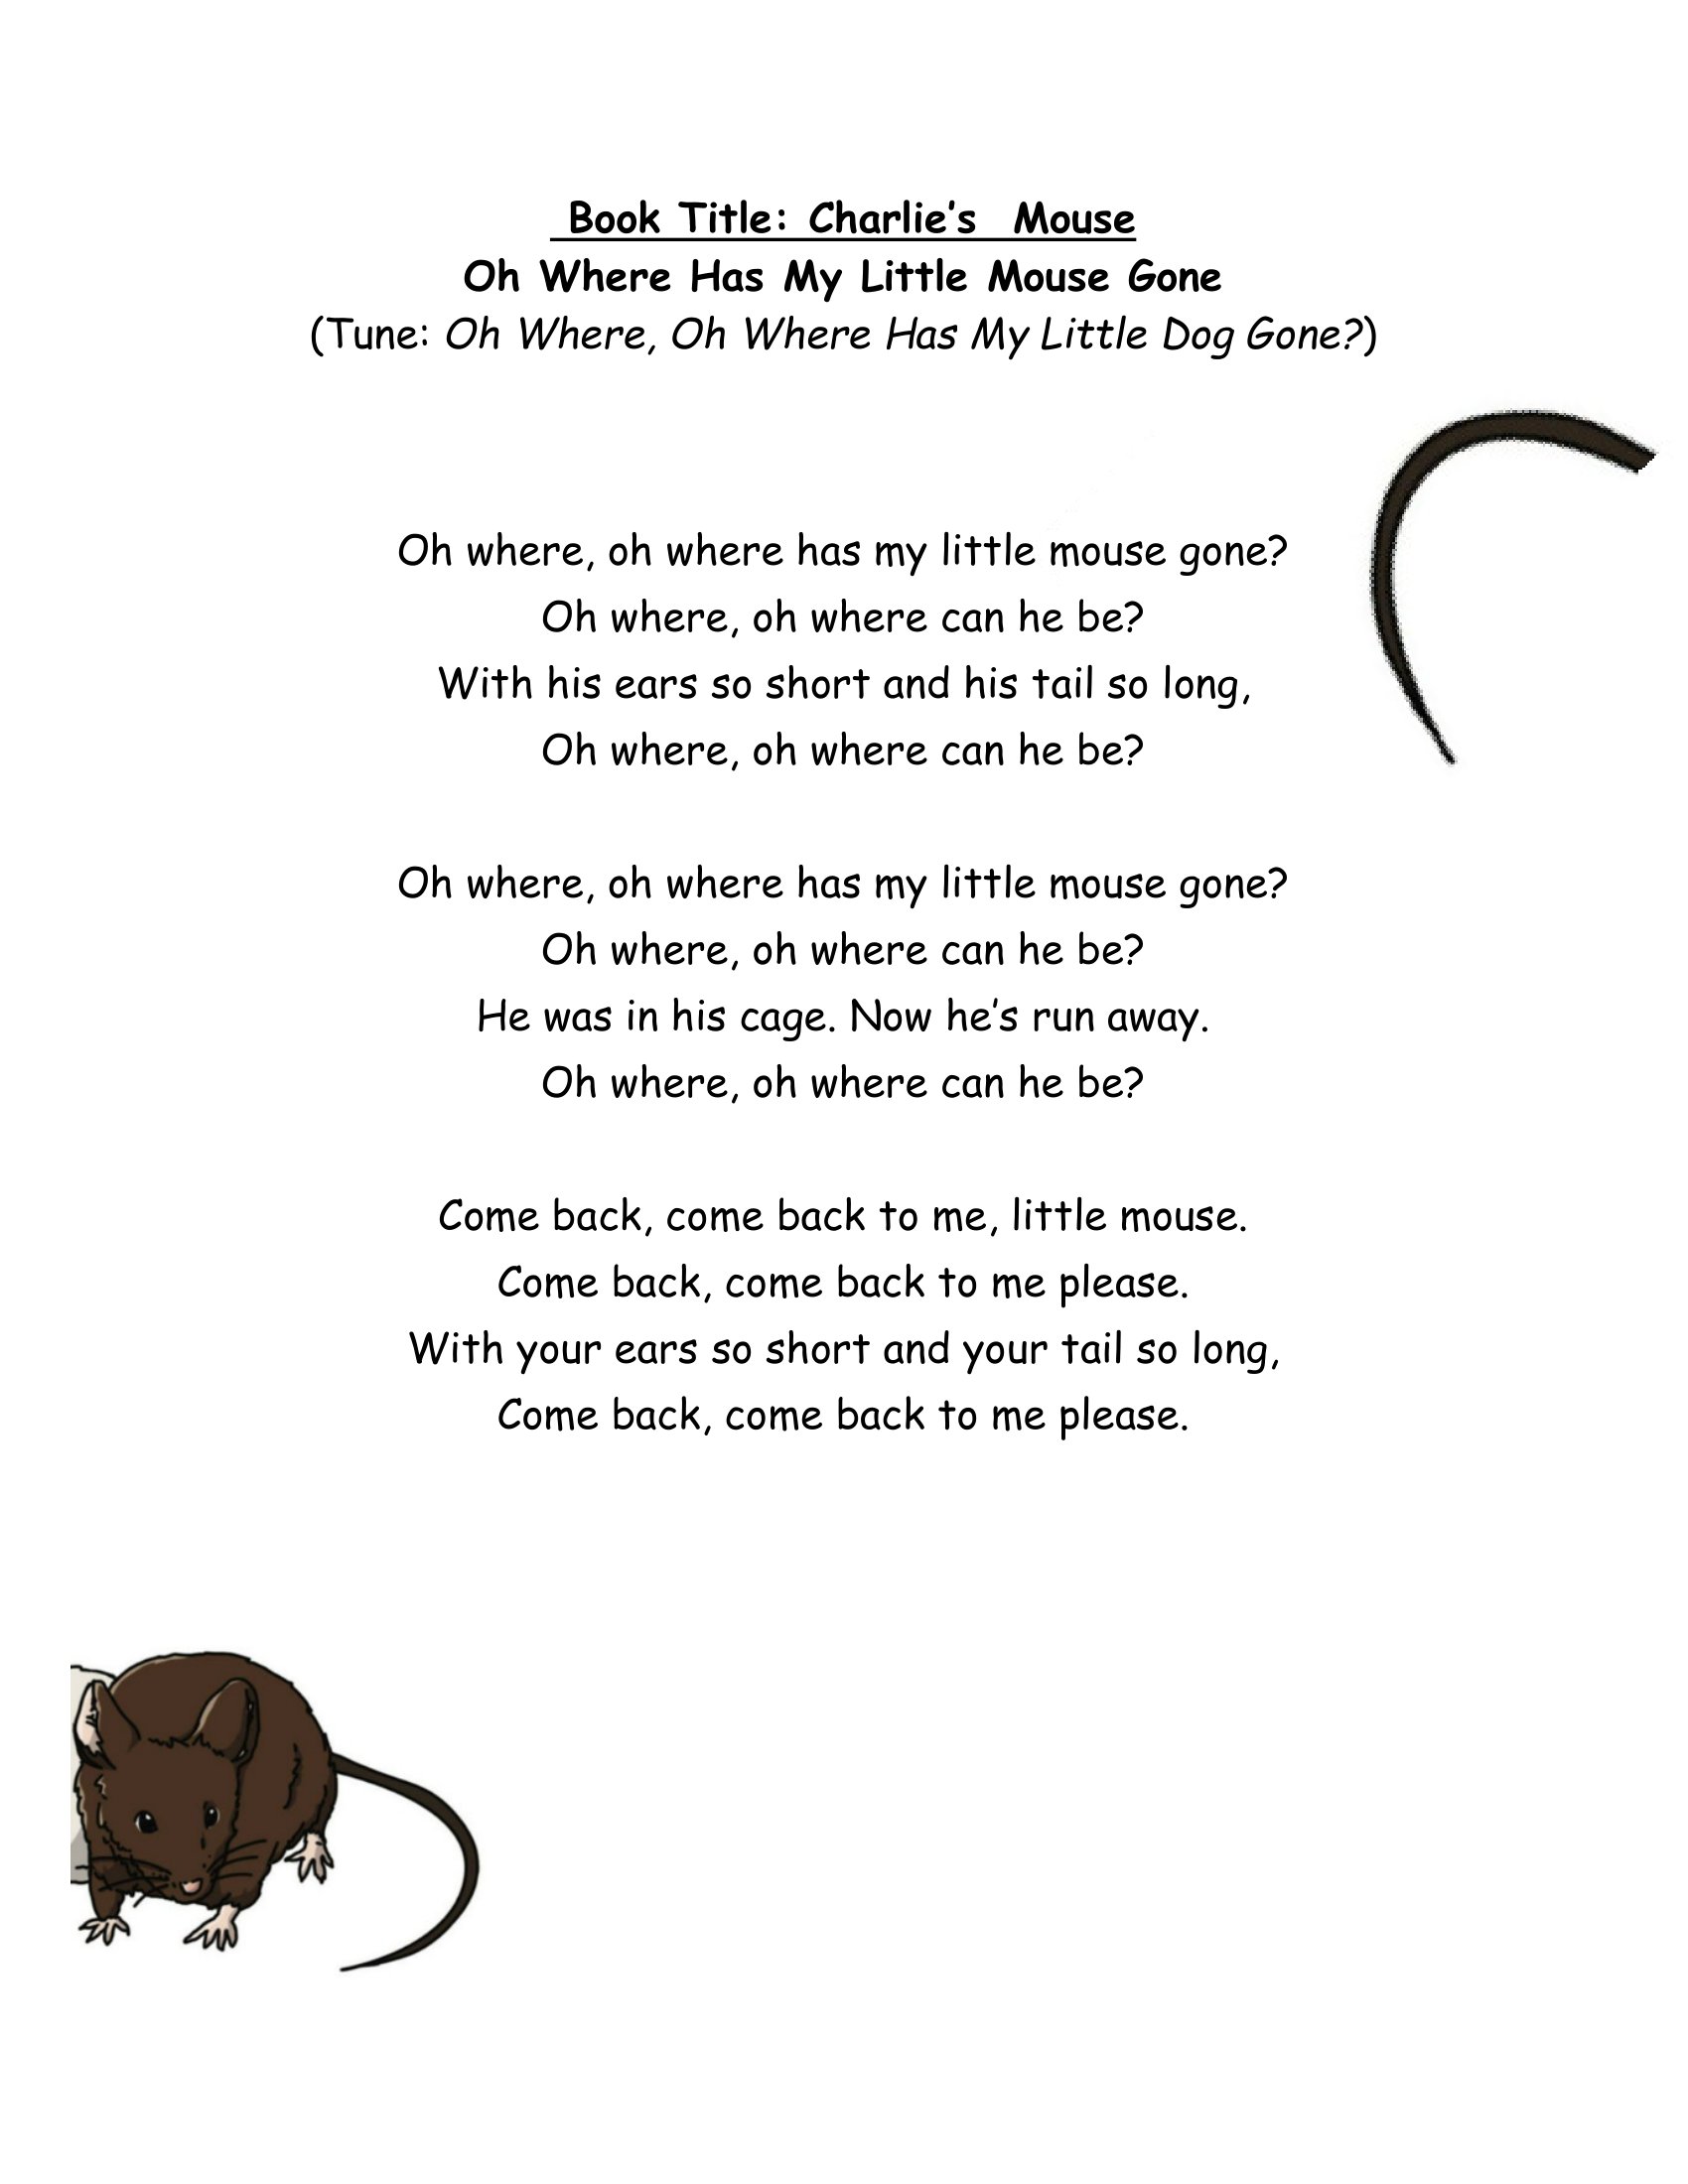 K1_EL_Song_06_Oh Where Has My Little Mouse Gone.jpg